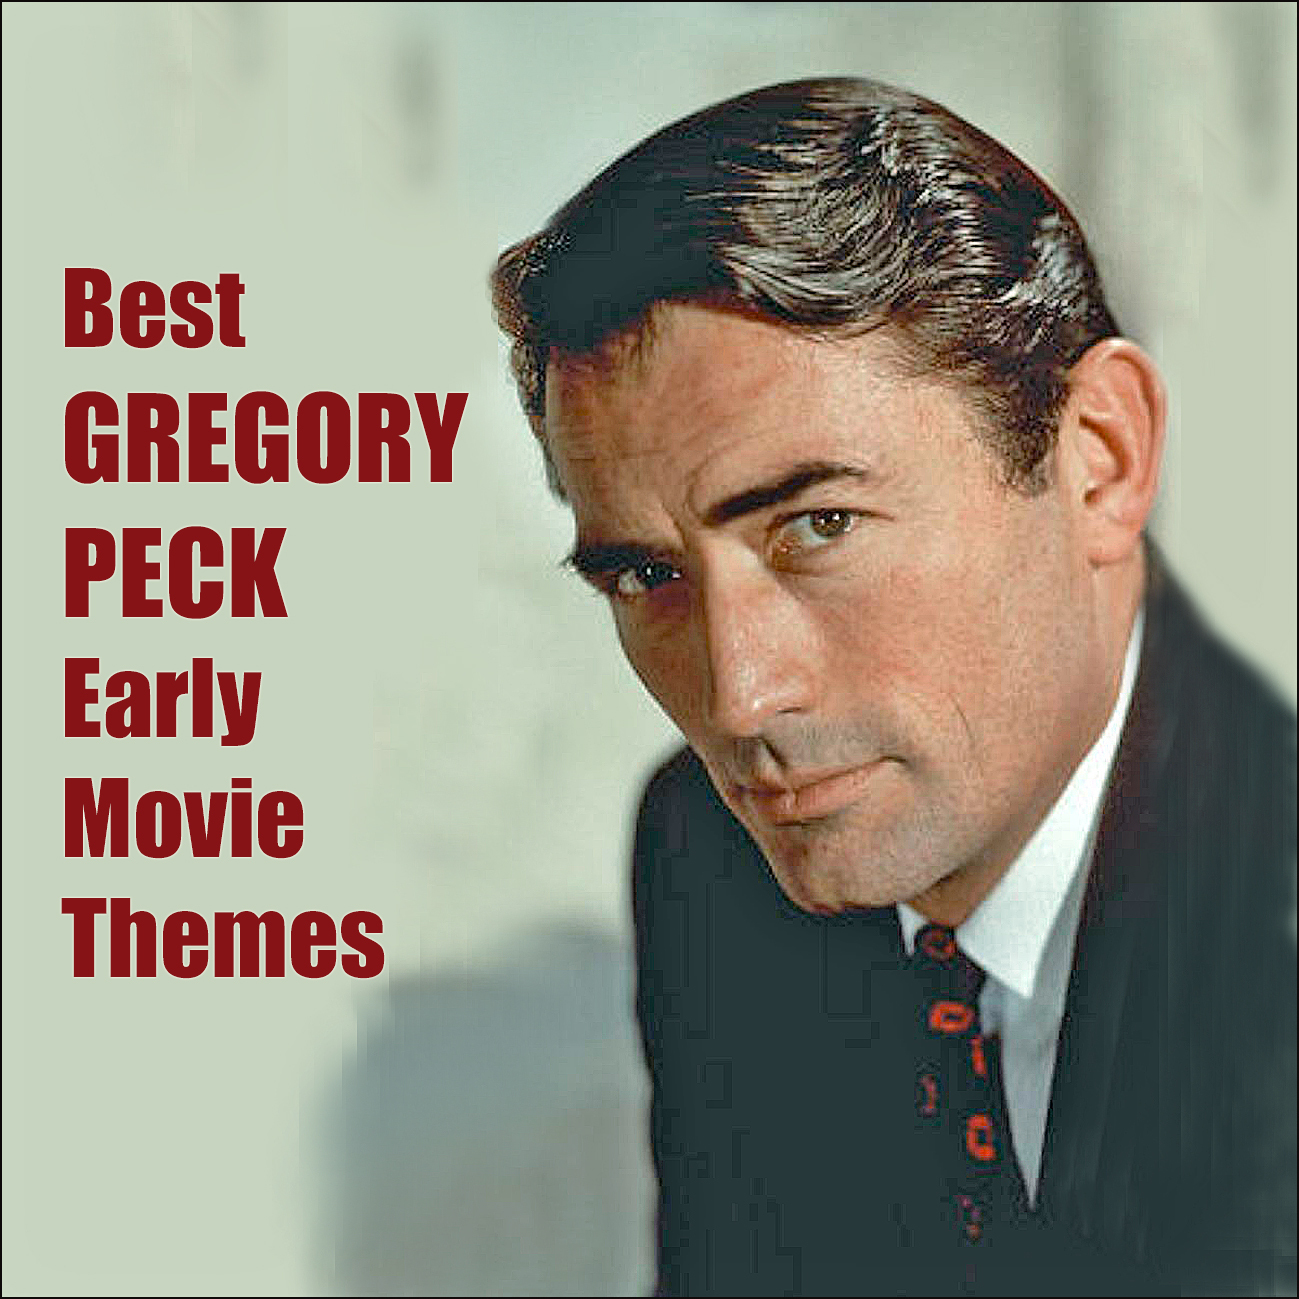 Best Gregory Peck Early Movie Themes